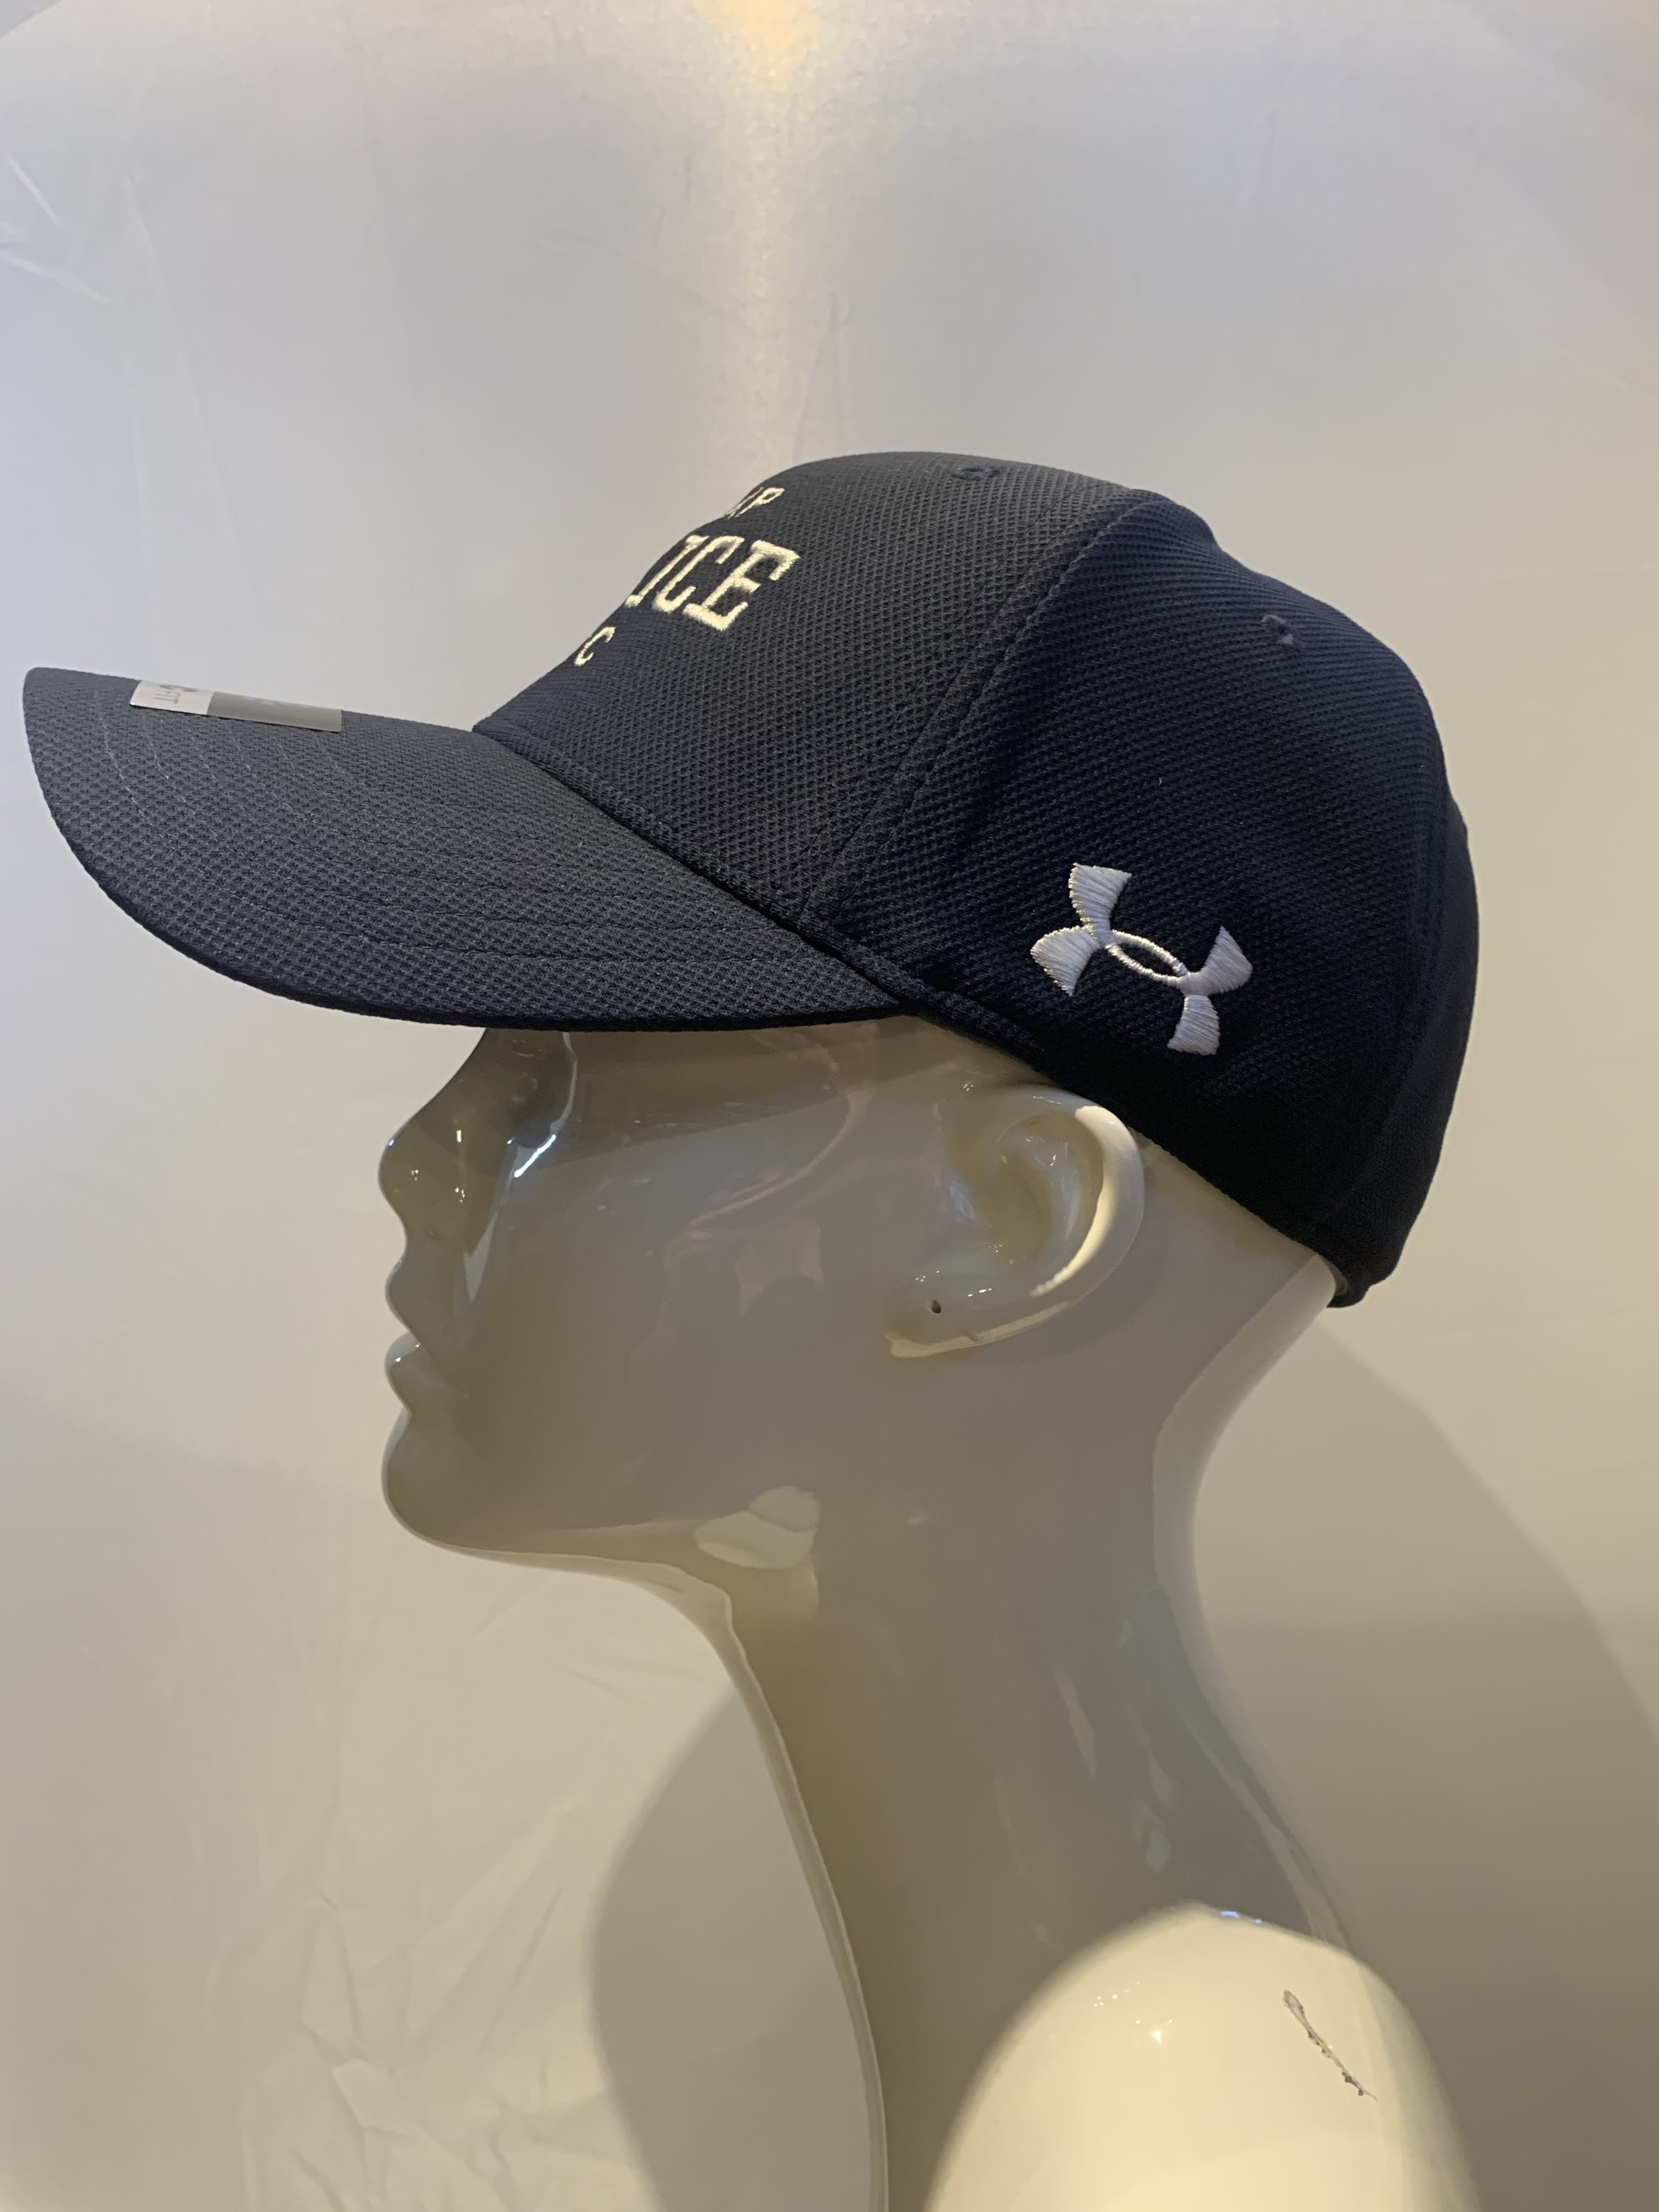 under armour police hat